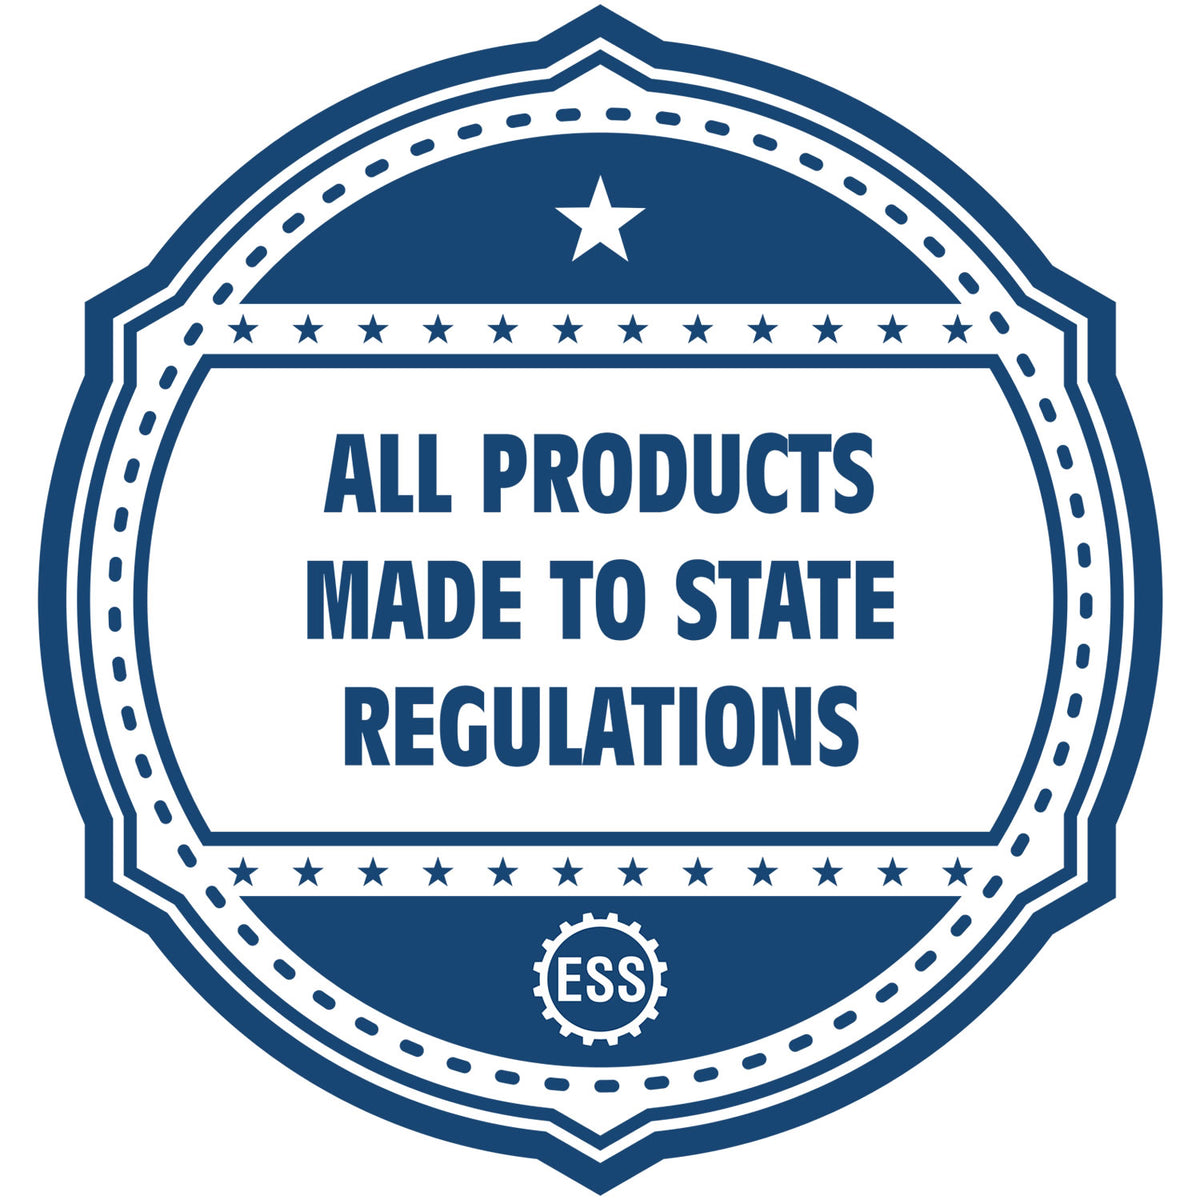 An icon or badge element for the State of North Carolina Extended Long Reach Engineer Seal showing that this product is made in compliance with state regulations.